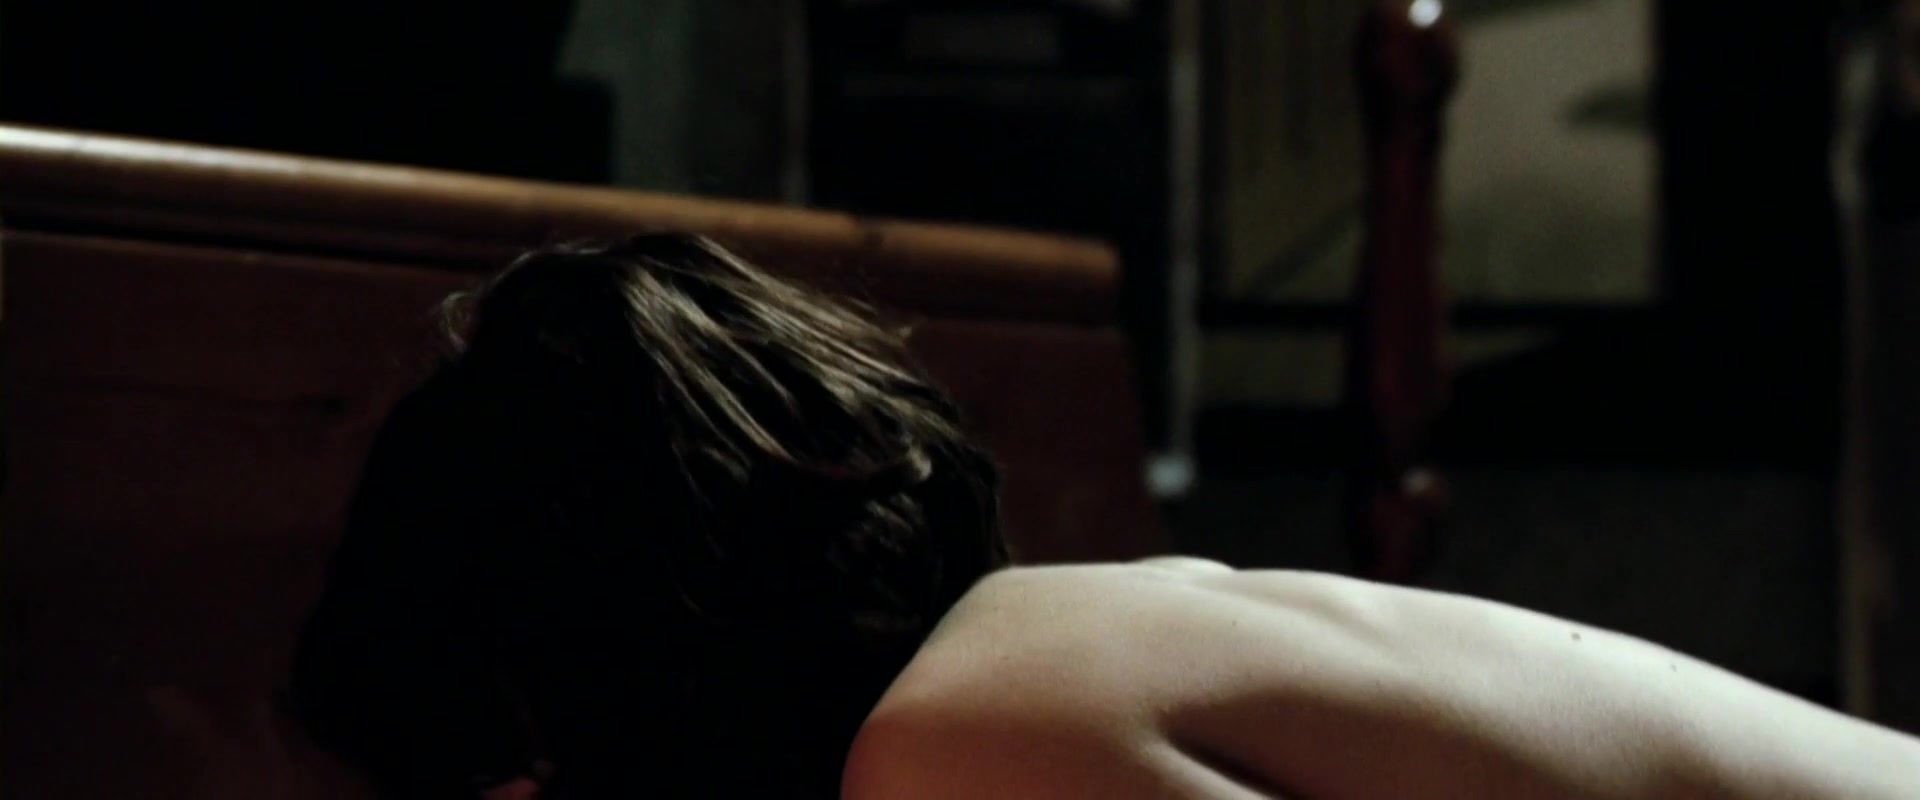 Hole Tuppence Middleton - Cleanskin (2012) Anal Play